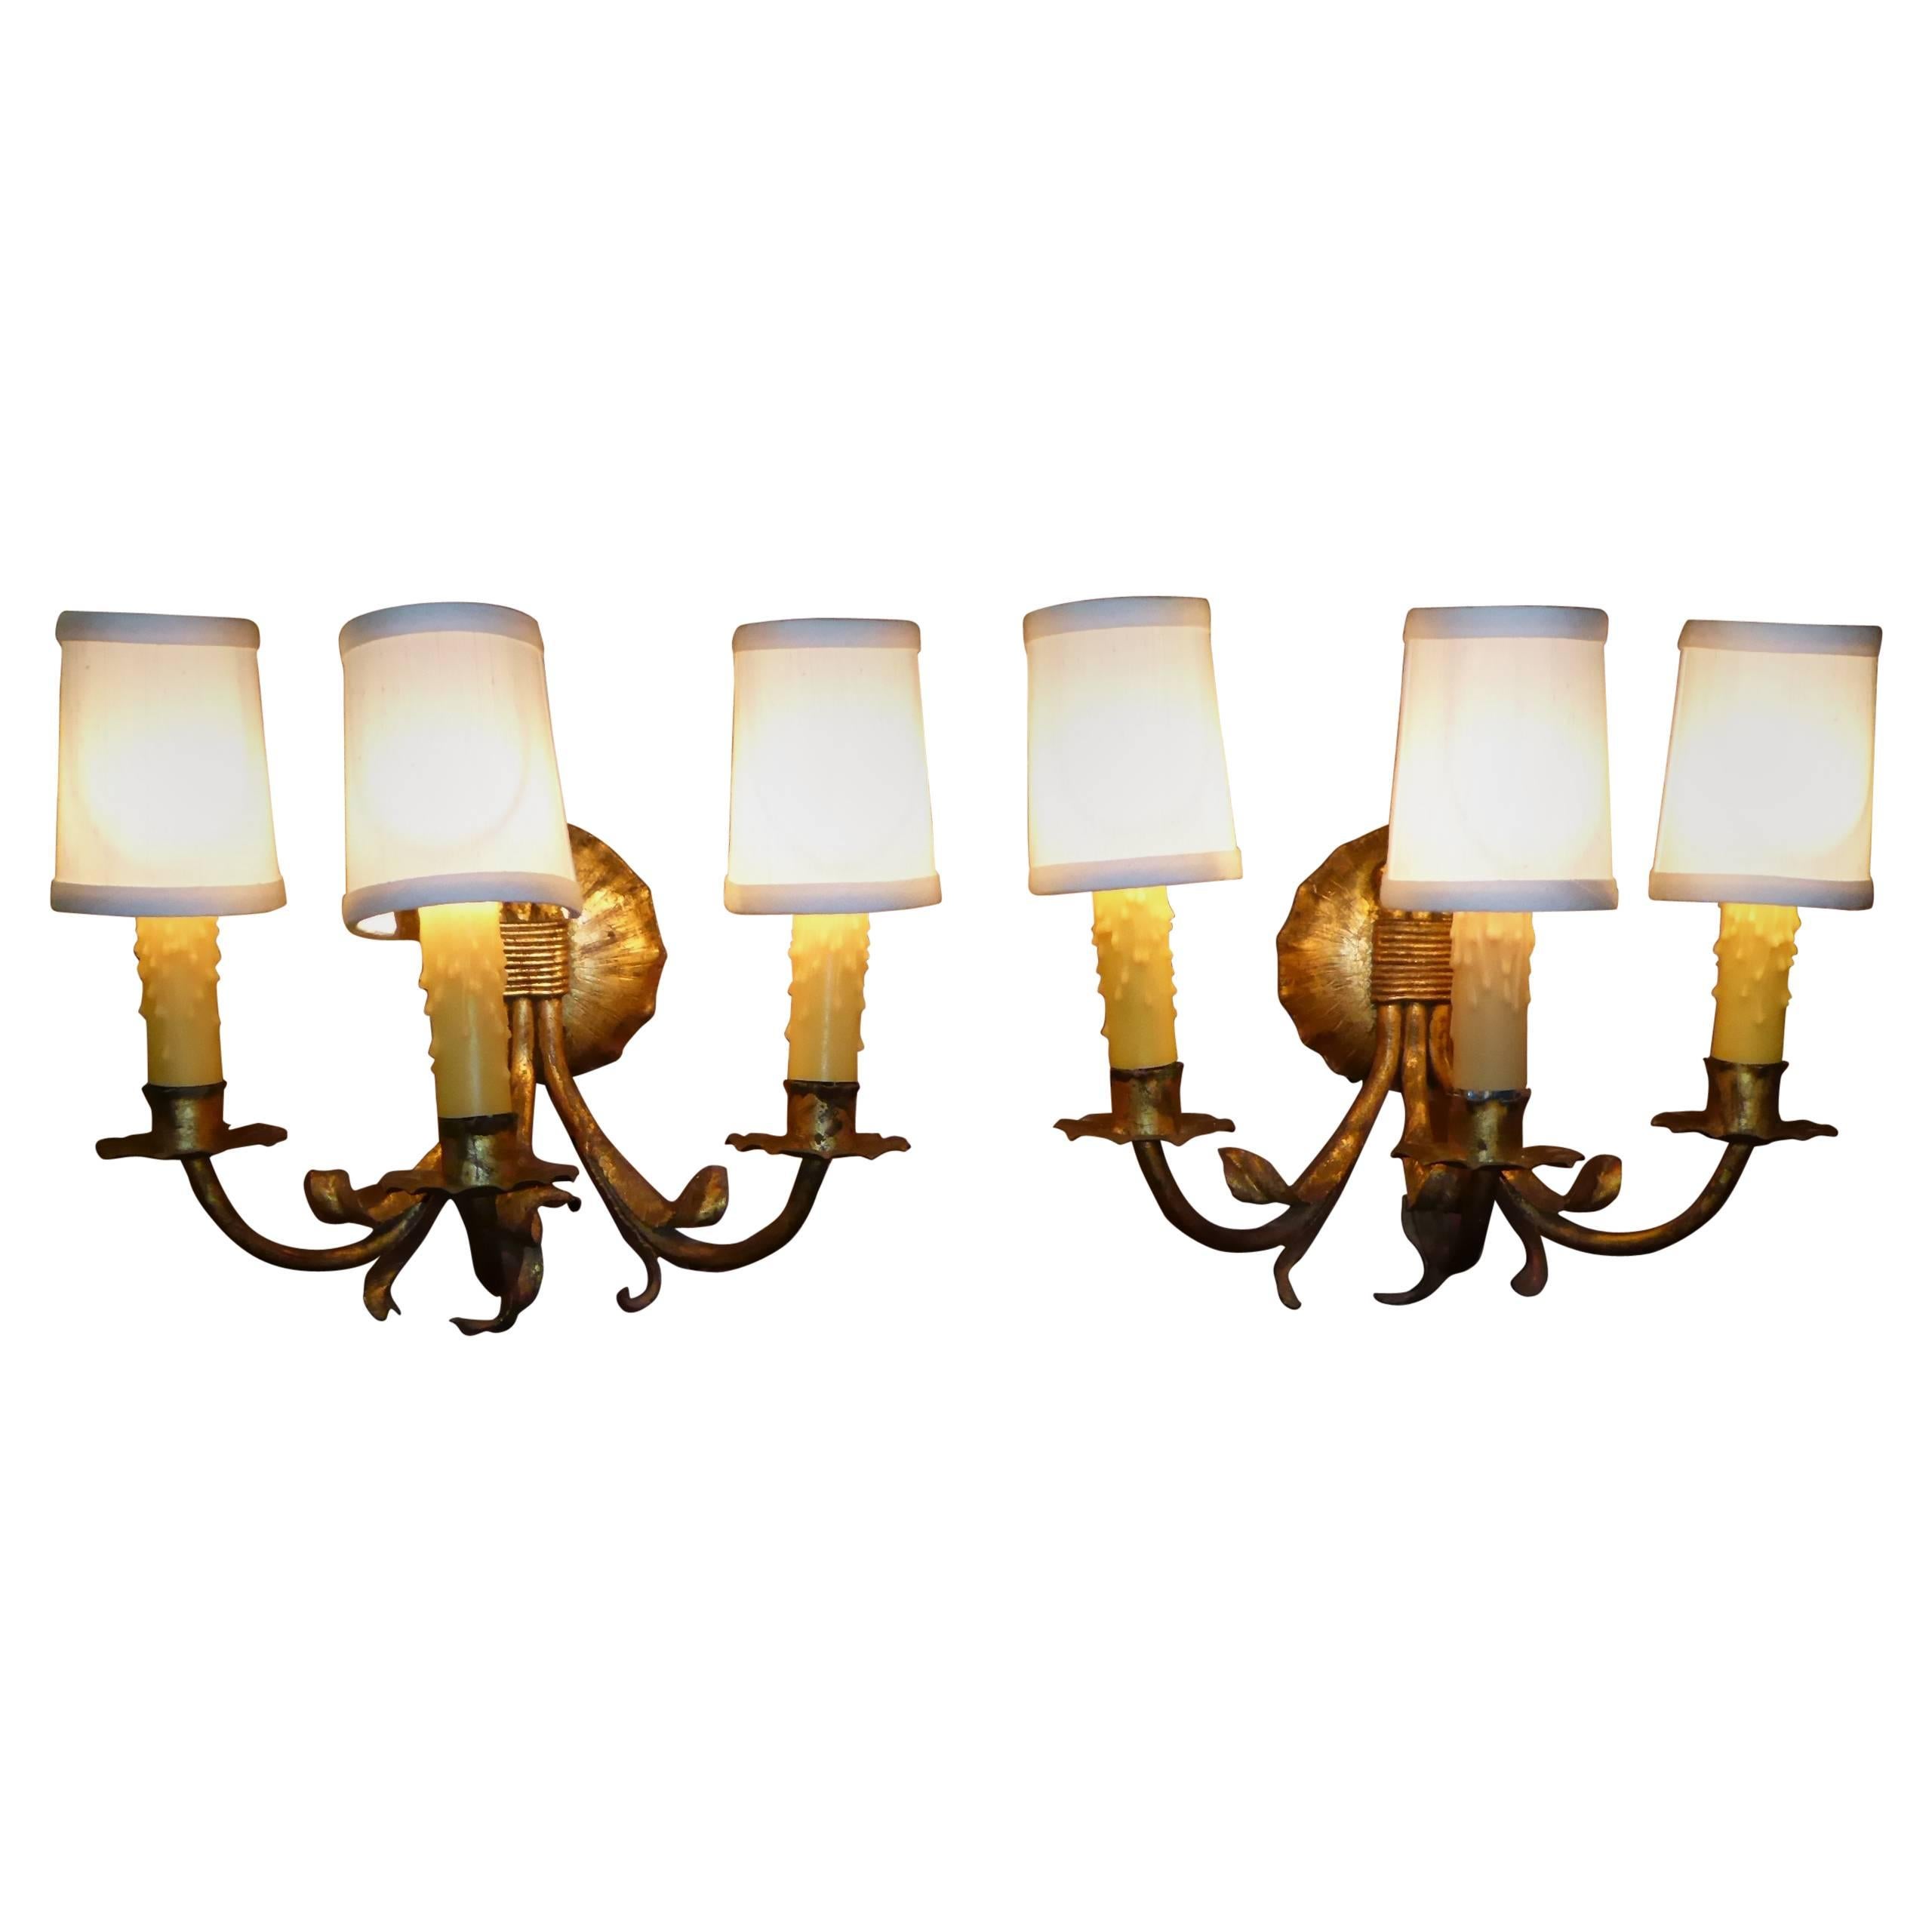 1950s Modern Neoclassical Gilt Metal Three Candle Sconces Barcelona For Sale